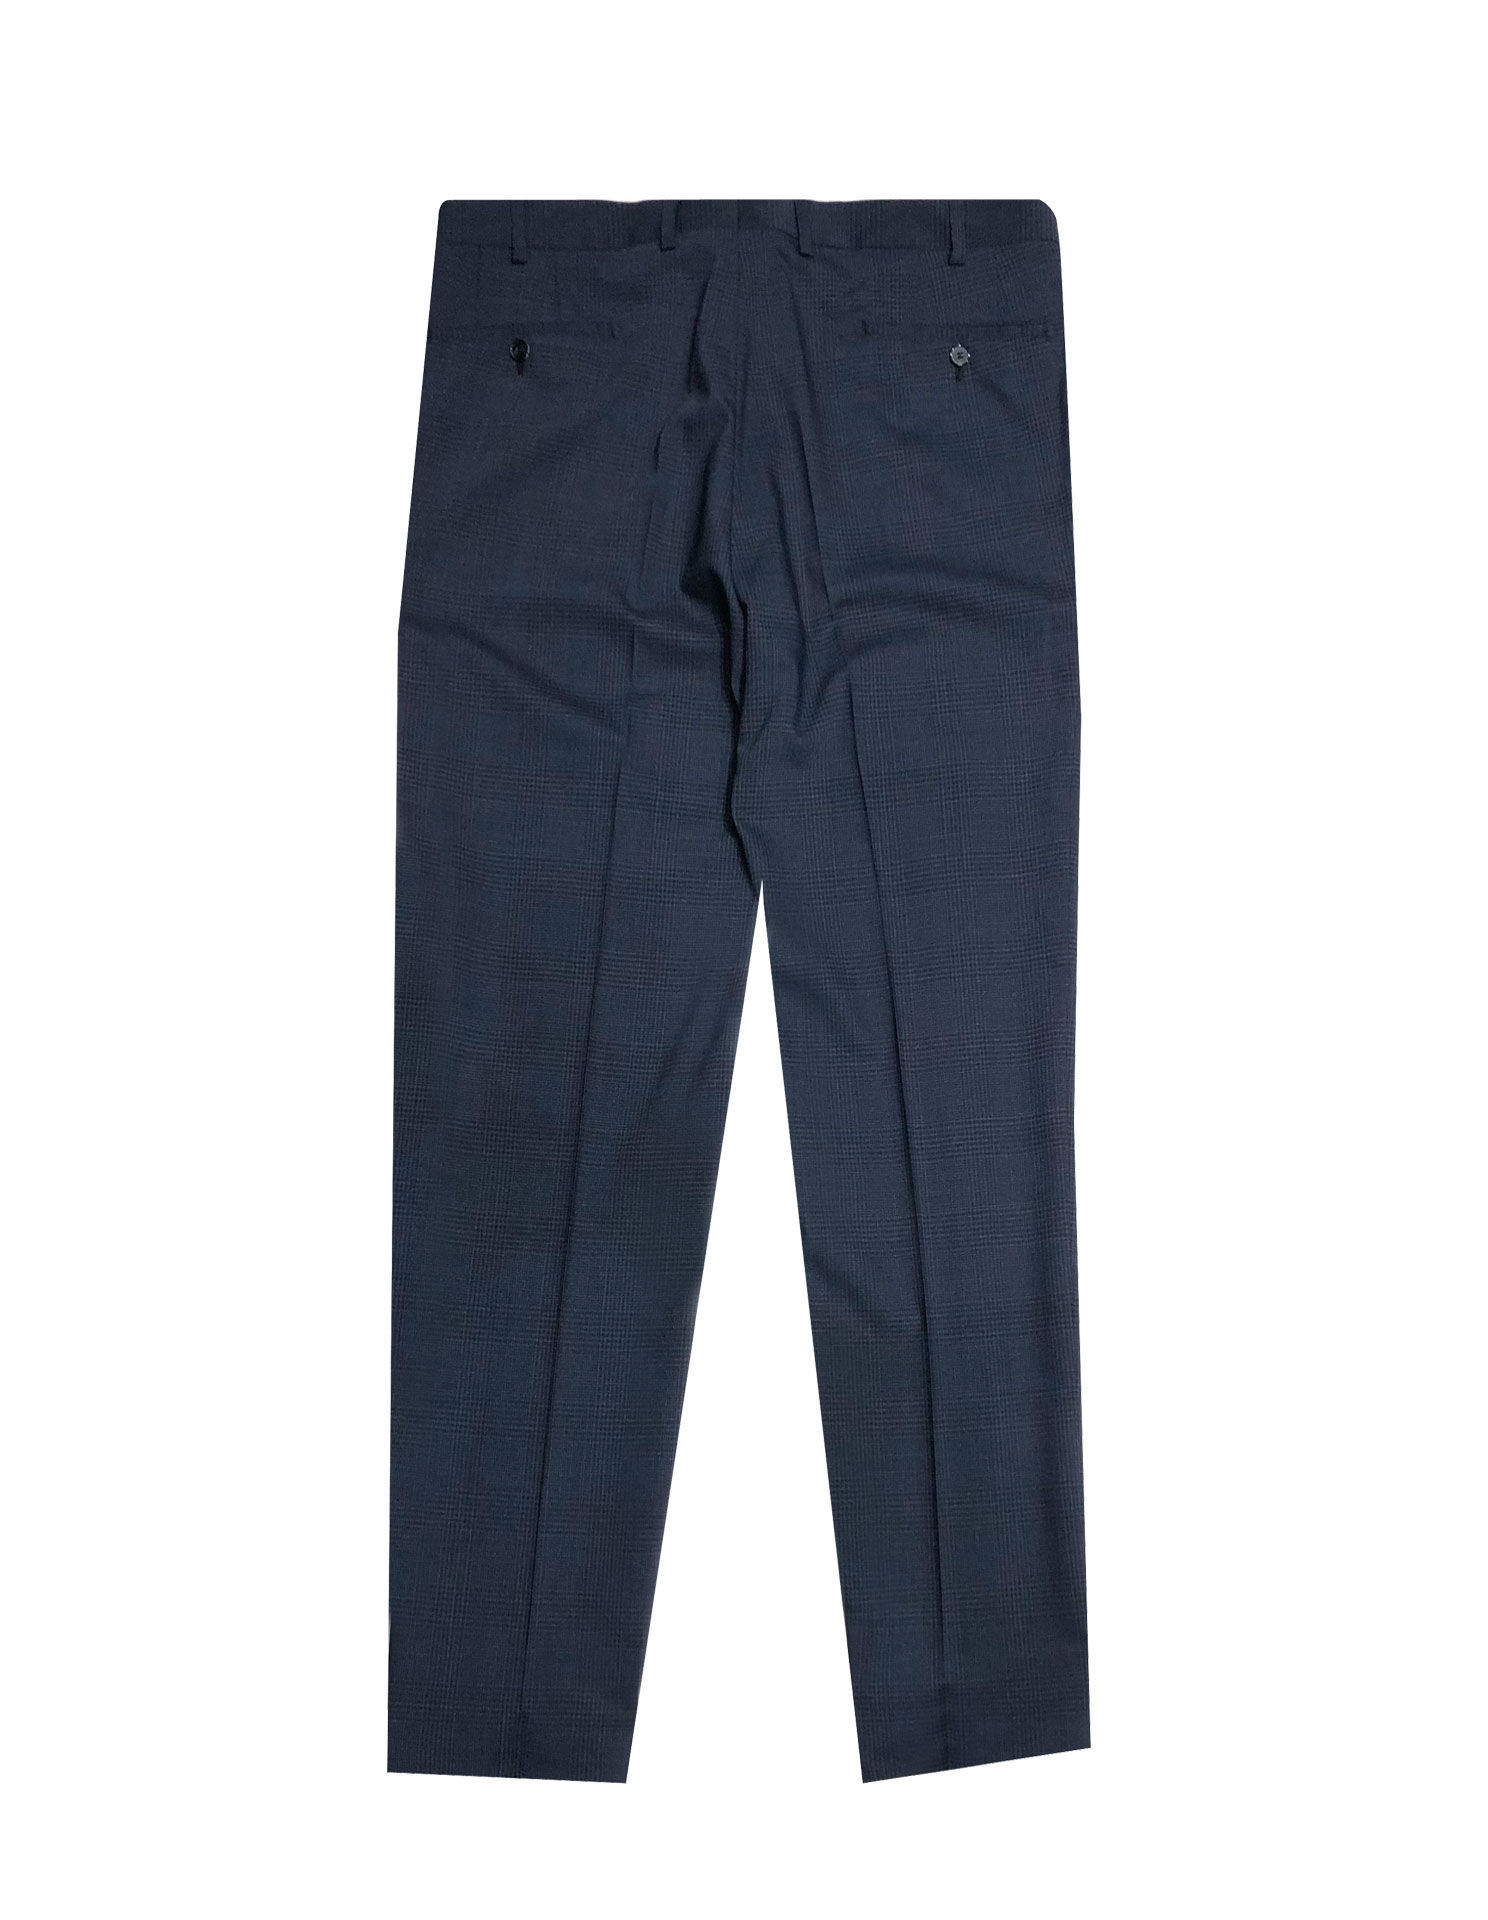 Karl Lagerfeld Stretch Check Navy 3 Piece Suit - George Harrison ...